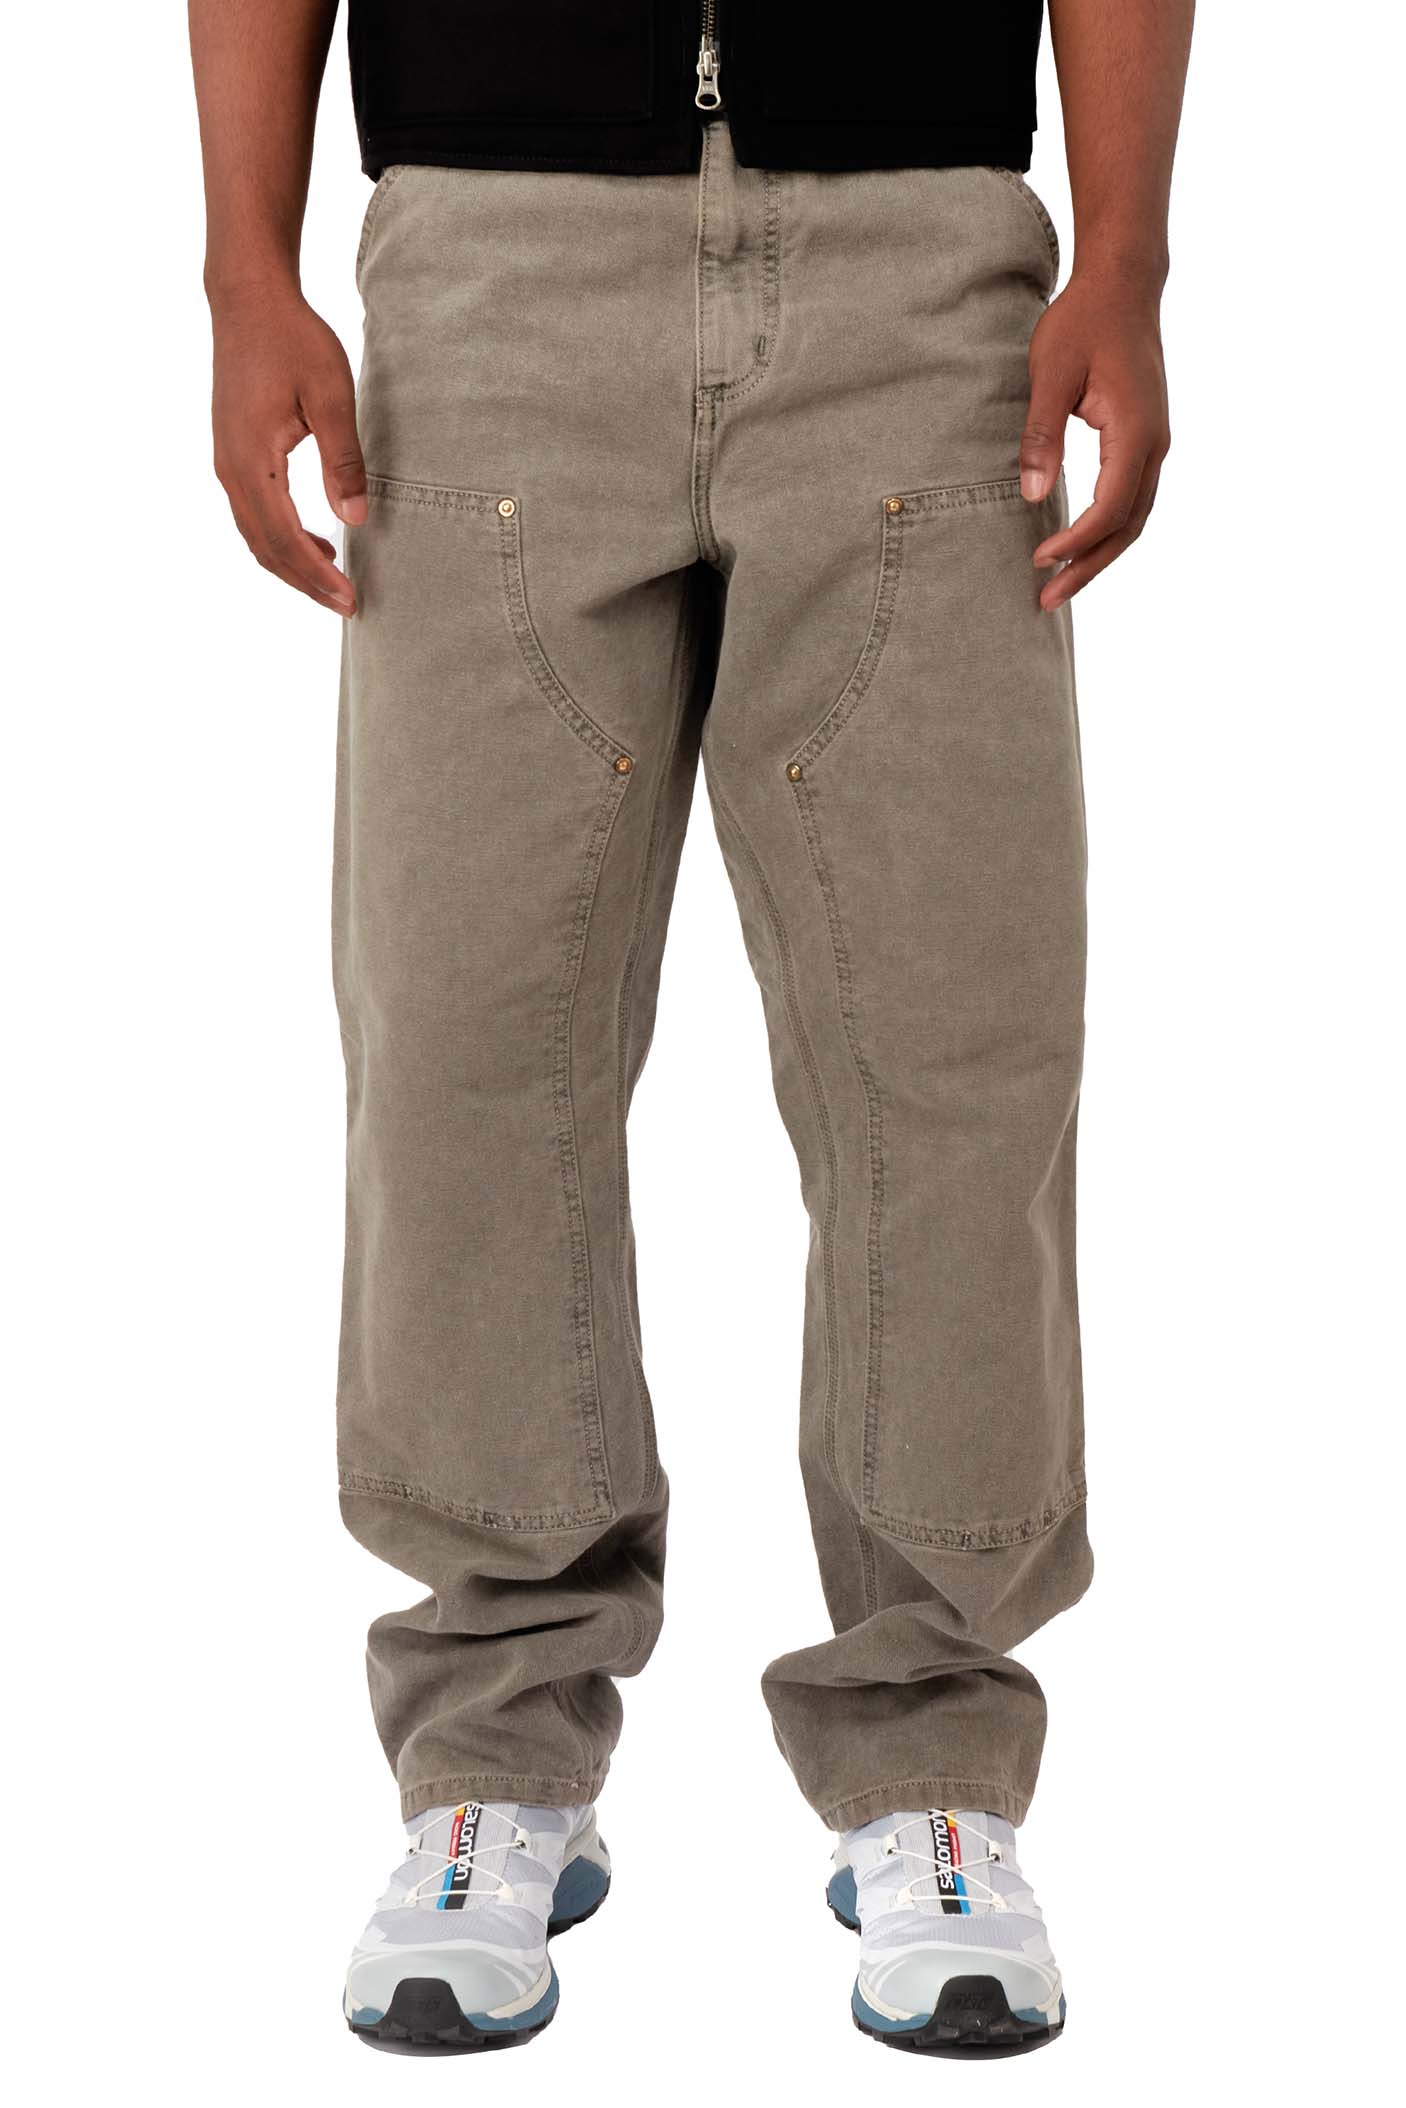 Carhartt WIP Double Knee Pant – buy now at Asphaltgold Online Store!